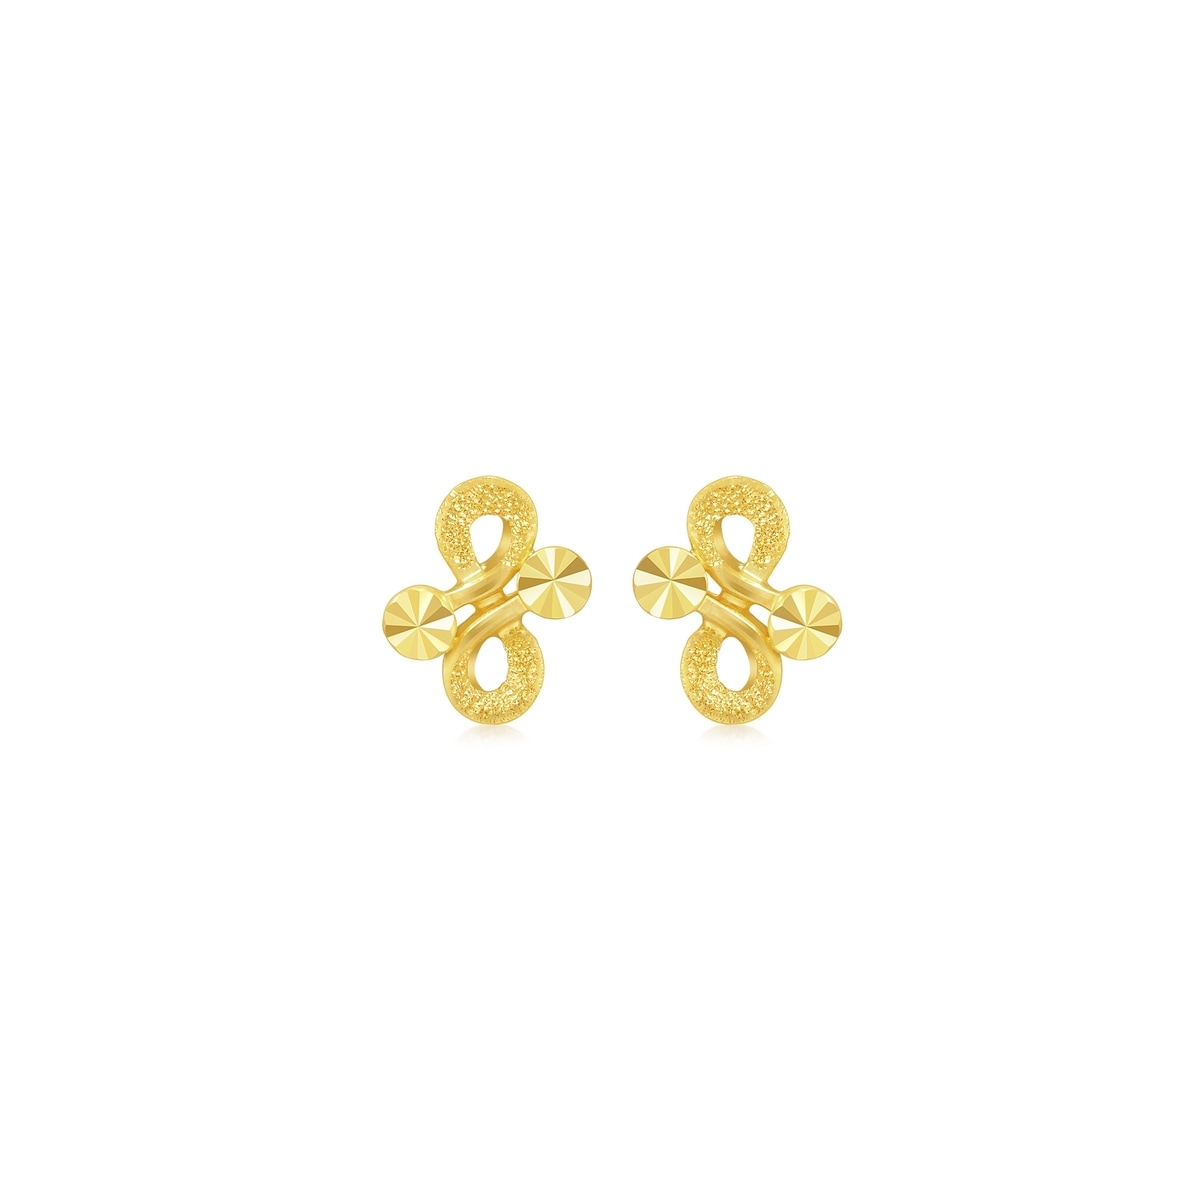 999.9 Gold Earring - 76860E | Chow Sang Sang Jewellery